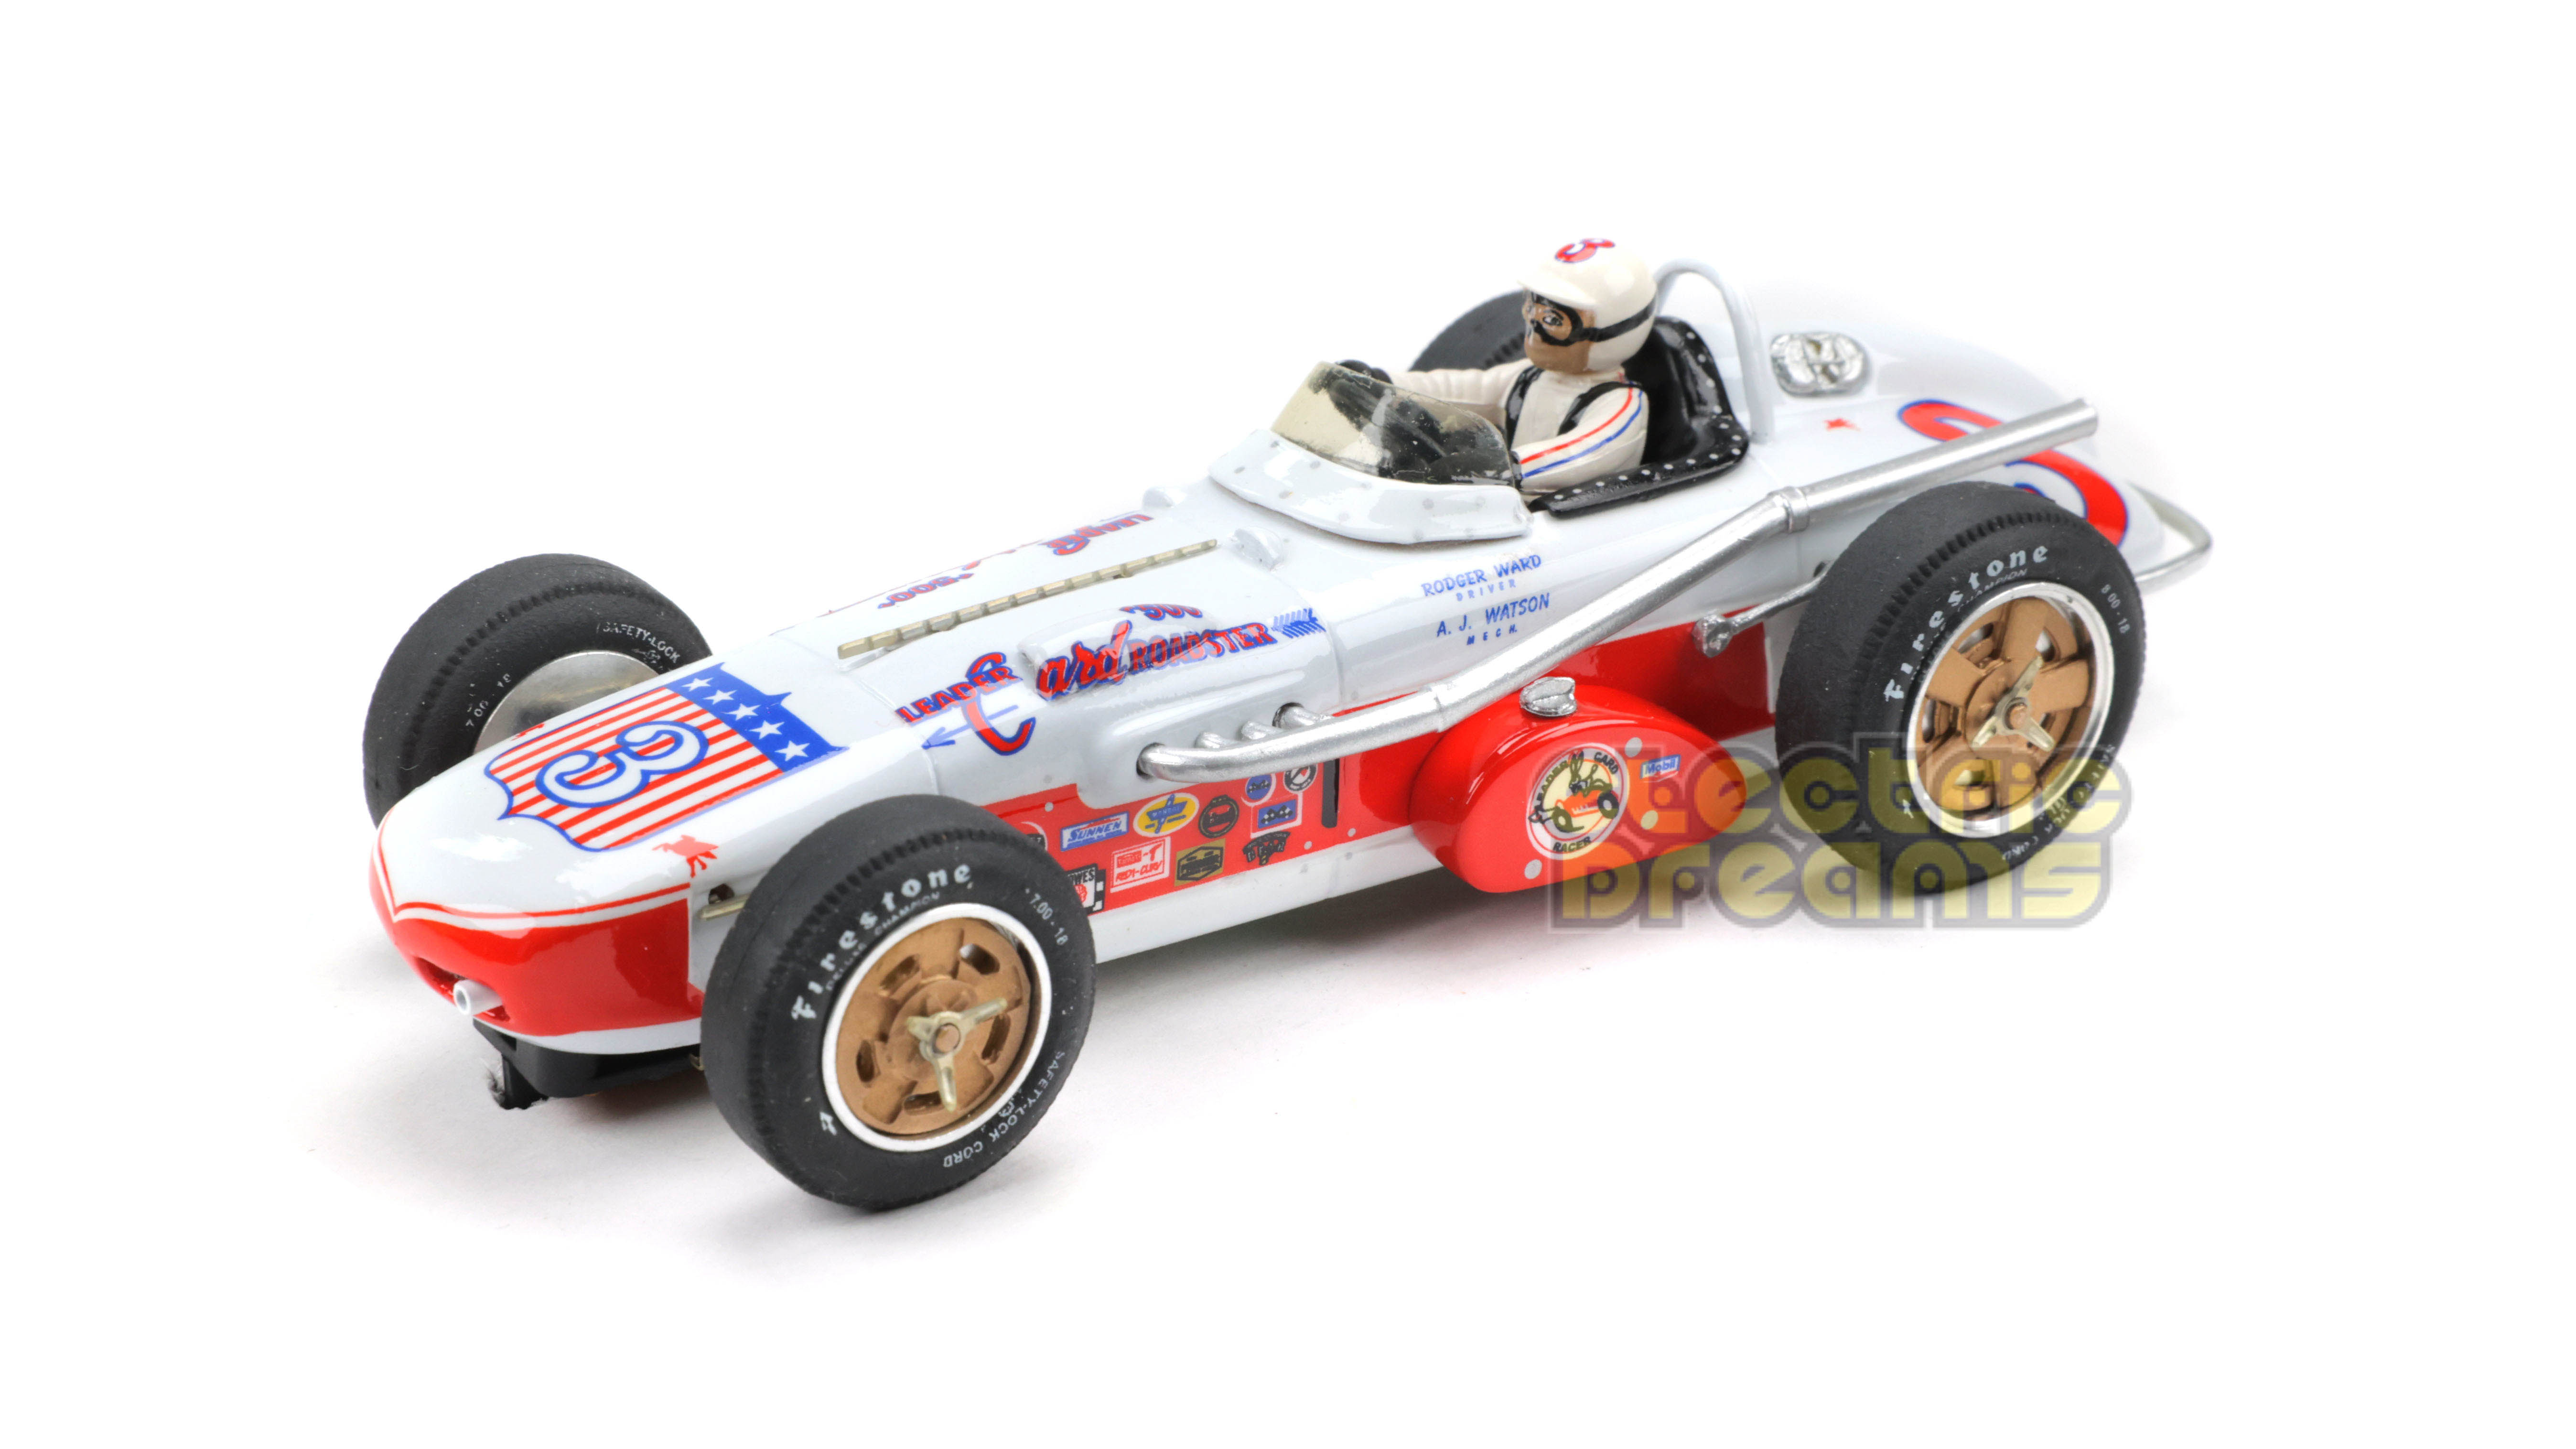 Slot Indy by Ostorero ODG180 - Watson-Offenhauser #3 - '62 Indy 500 - Rodger Ward